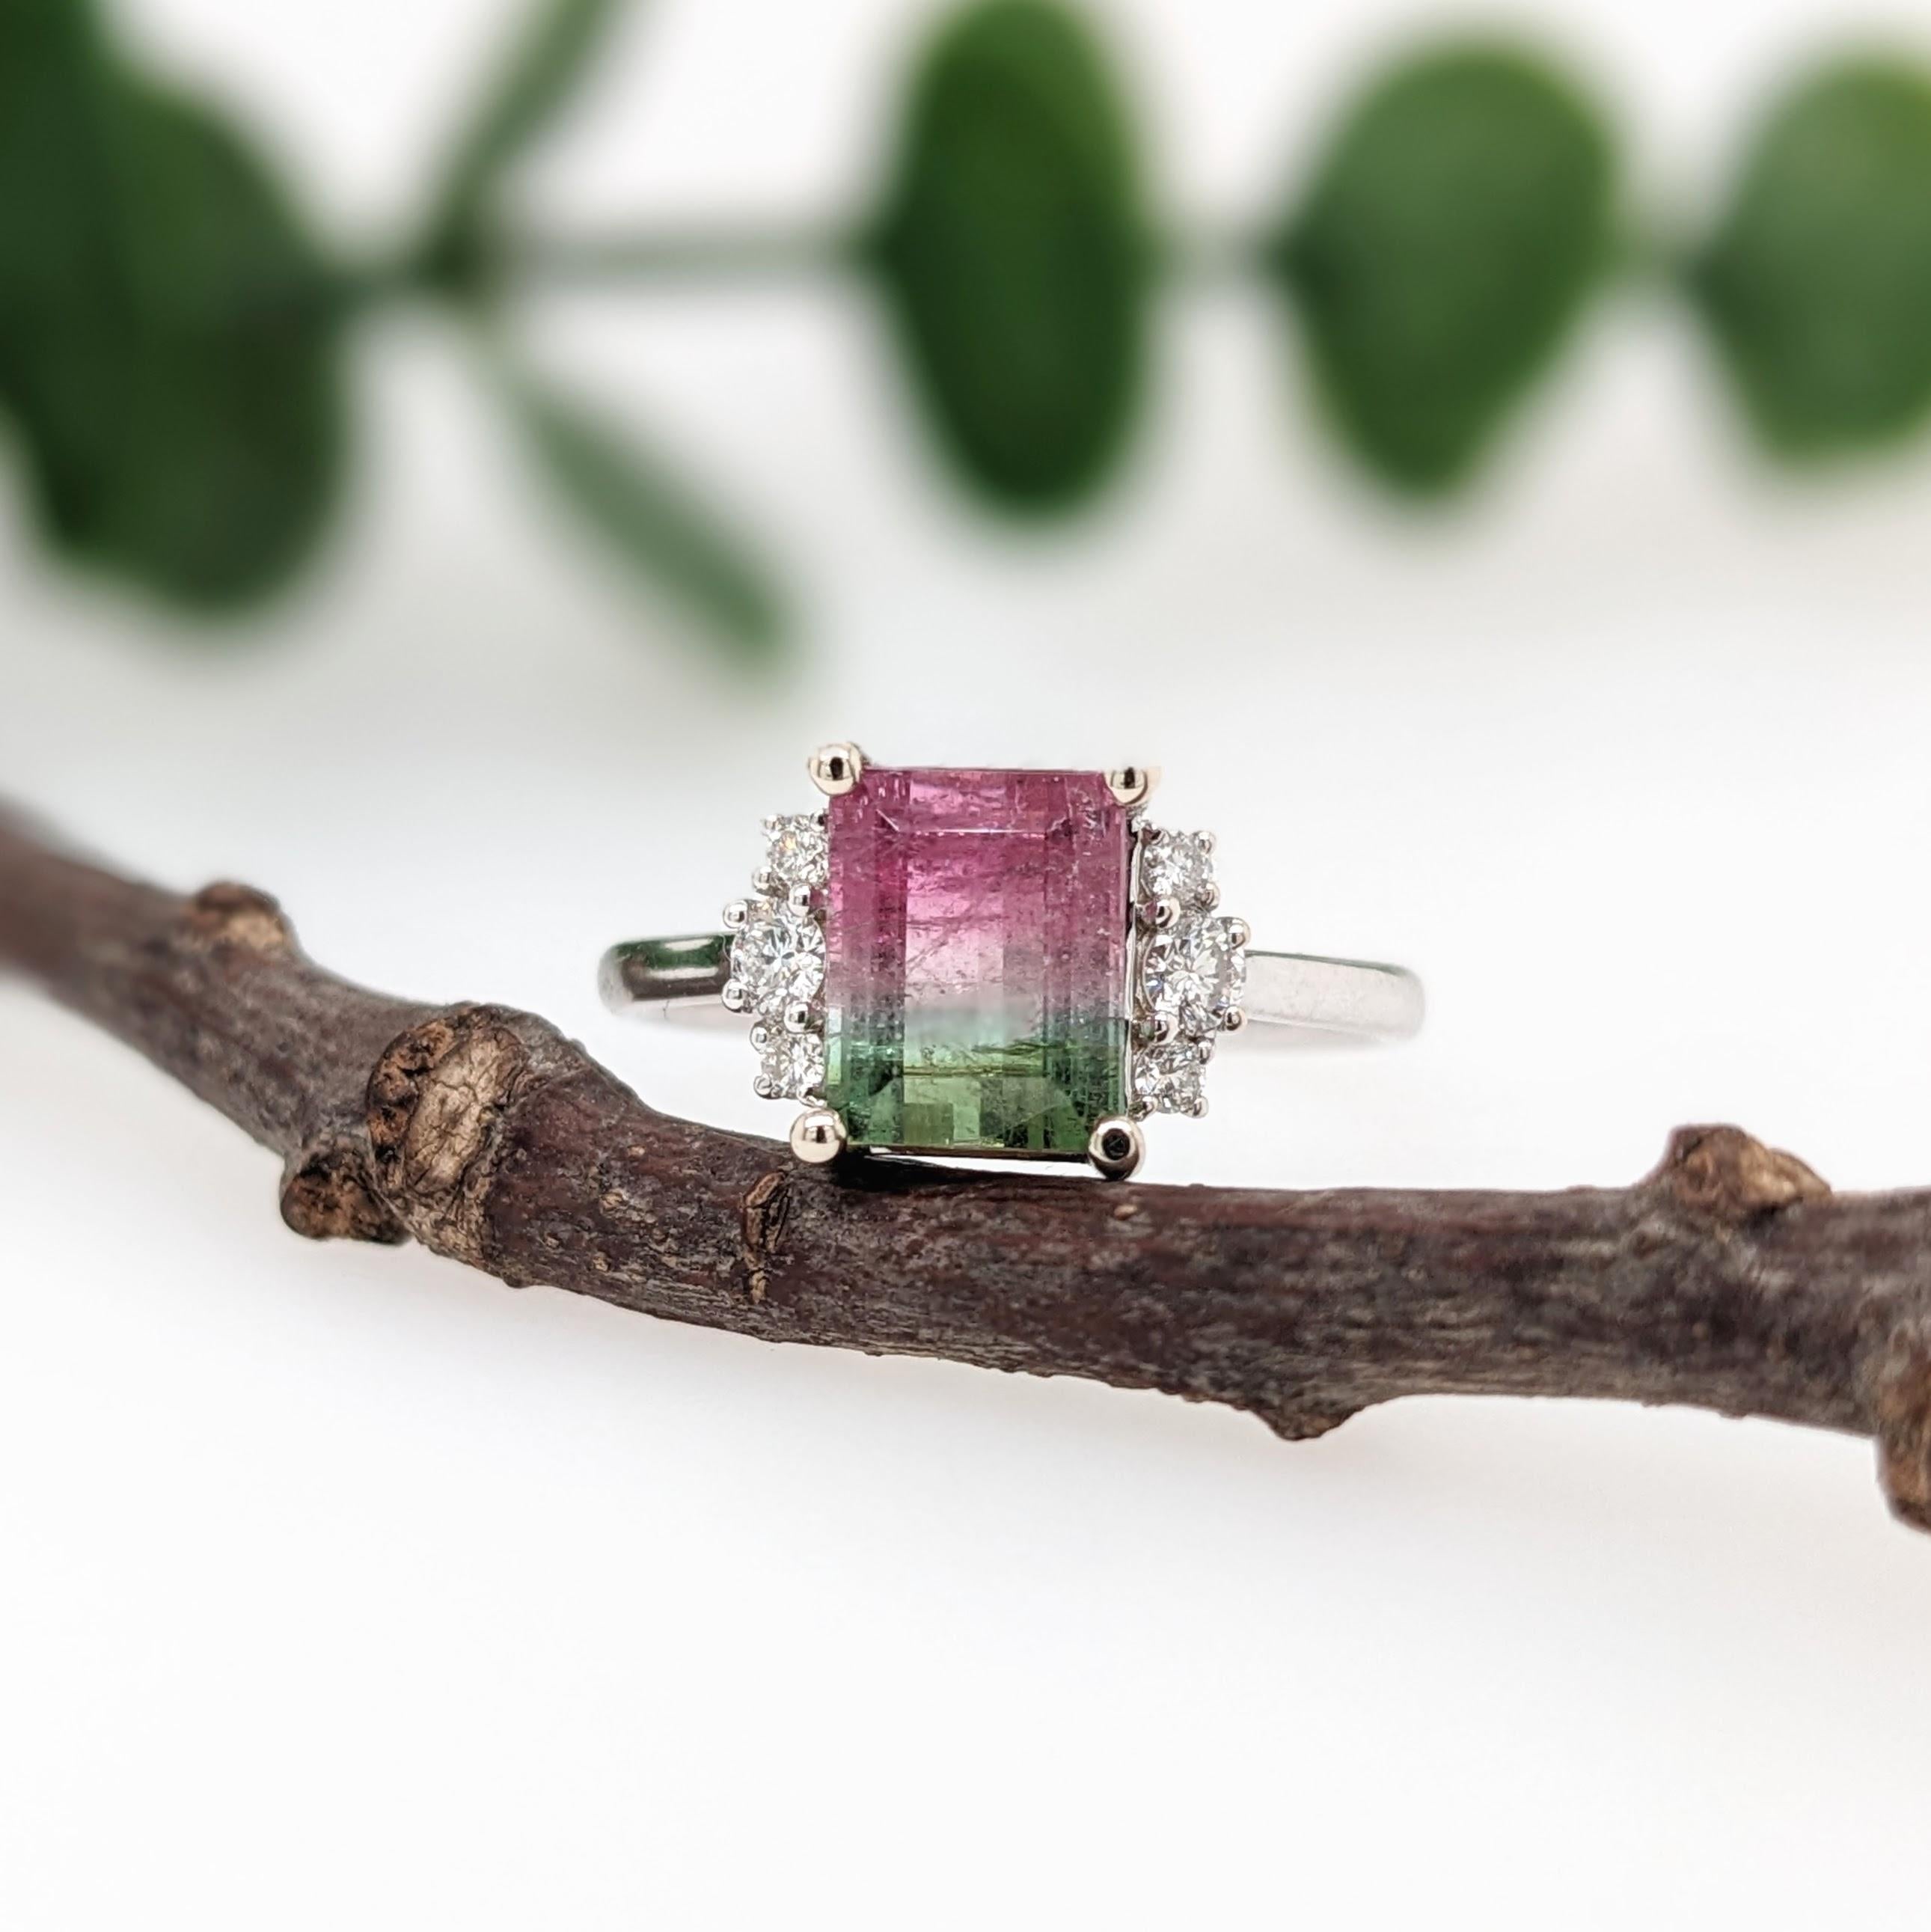 This ring features a beautiful pink and green watermelon Tourmaline with gorgeous saturated hues. It is set with sparkling natural diamond accents in 14k white Gold. A gorgeous statement ring to showcase this unique stone!

Specifications

Item